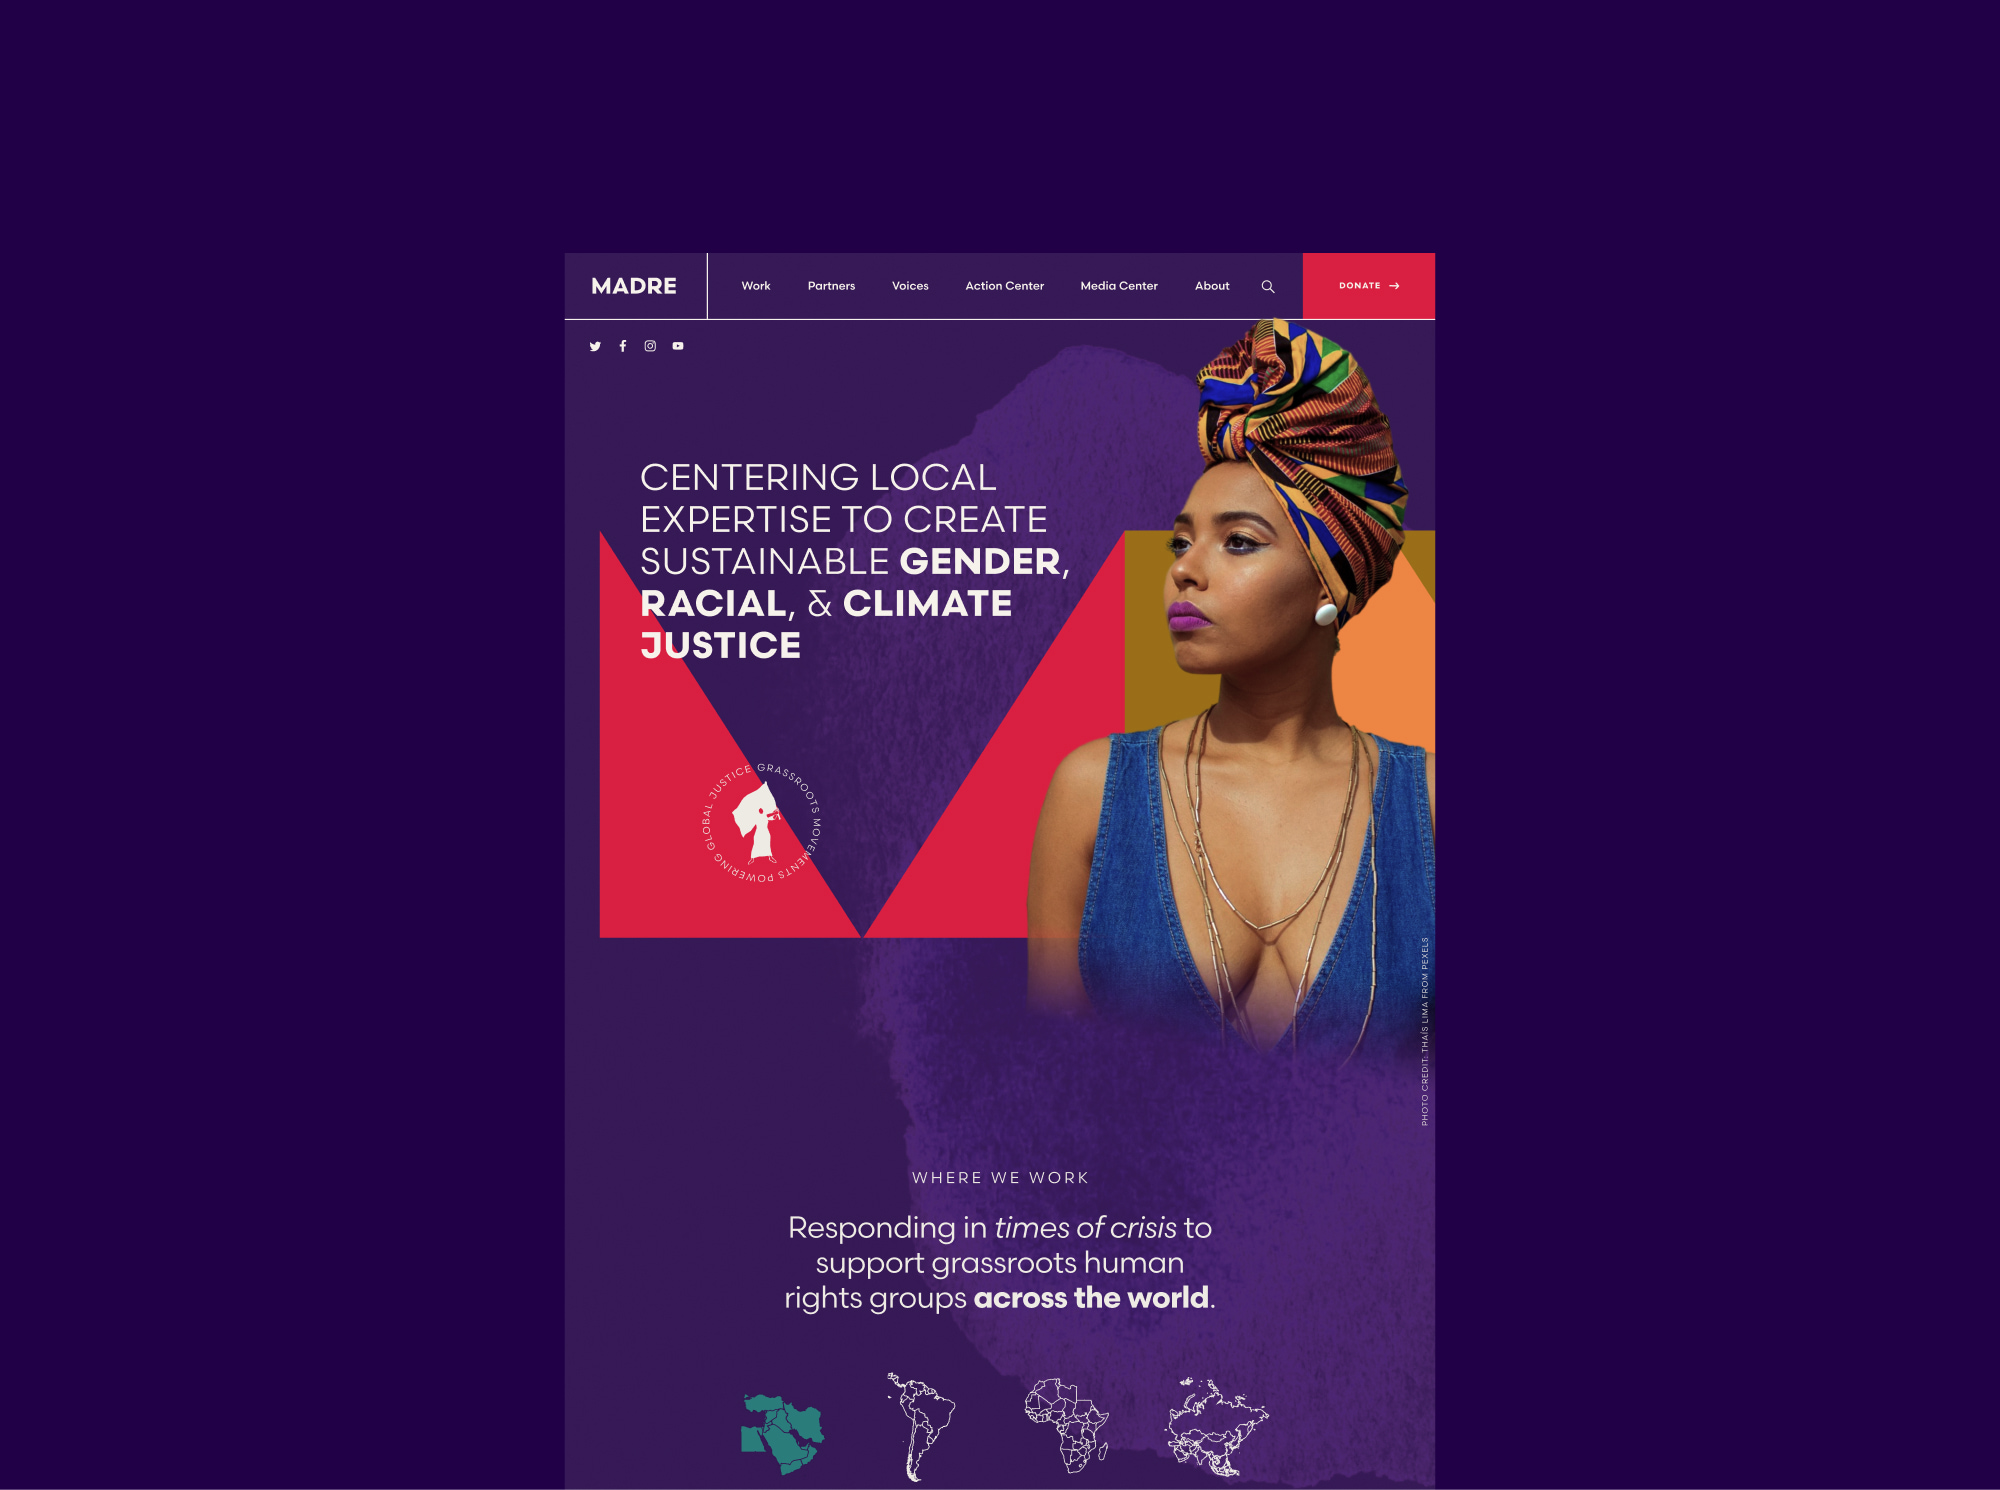 MADRE’s homepage web design sits on top of a dark purple background. The design features blocky, triangular elements in hot pink and orange with various headlines and typographic details. A black woman in a turban sits on top of the graphic shapes and looks of in the distance with resilience.